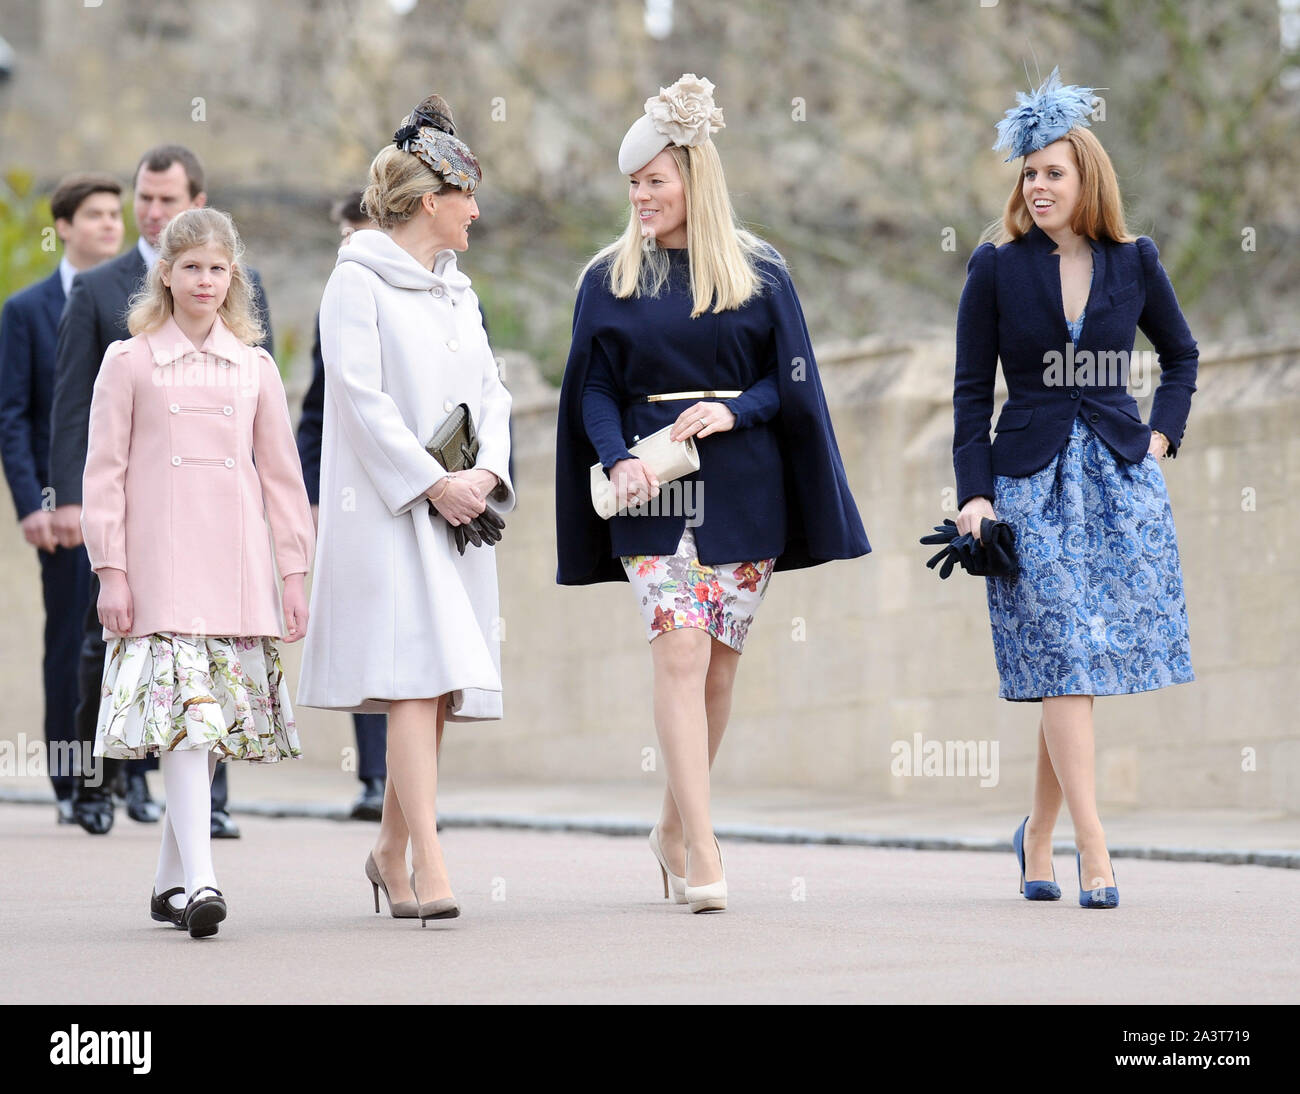 Photo Must Be Credited ©Kate Green/Alpha Press 079671 05/04/2015 Lady Louise Windsor, Sophie Countess of Wessex, Autumn Phillips and Princess Beatrice attend a Easter Day Church Service held at St George's Chapel, Windsor Castle Stock Photo